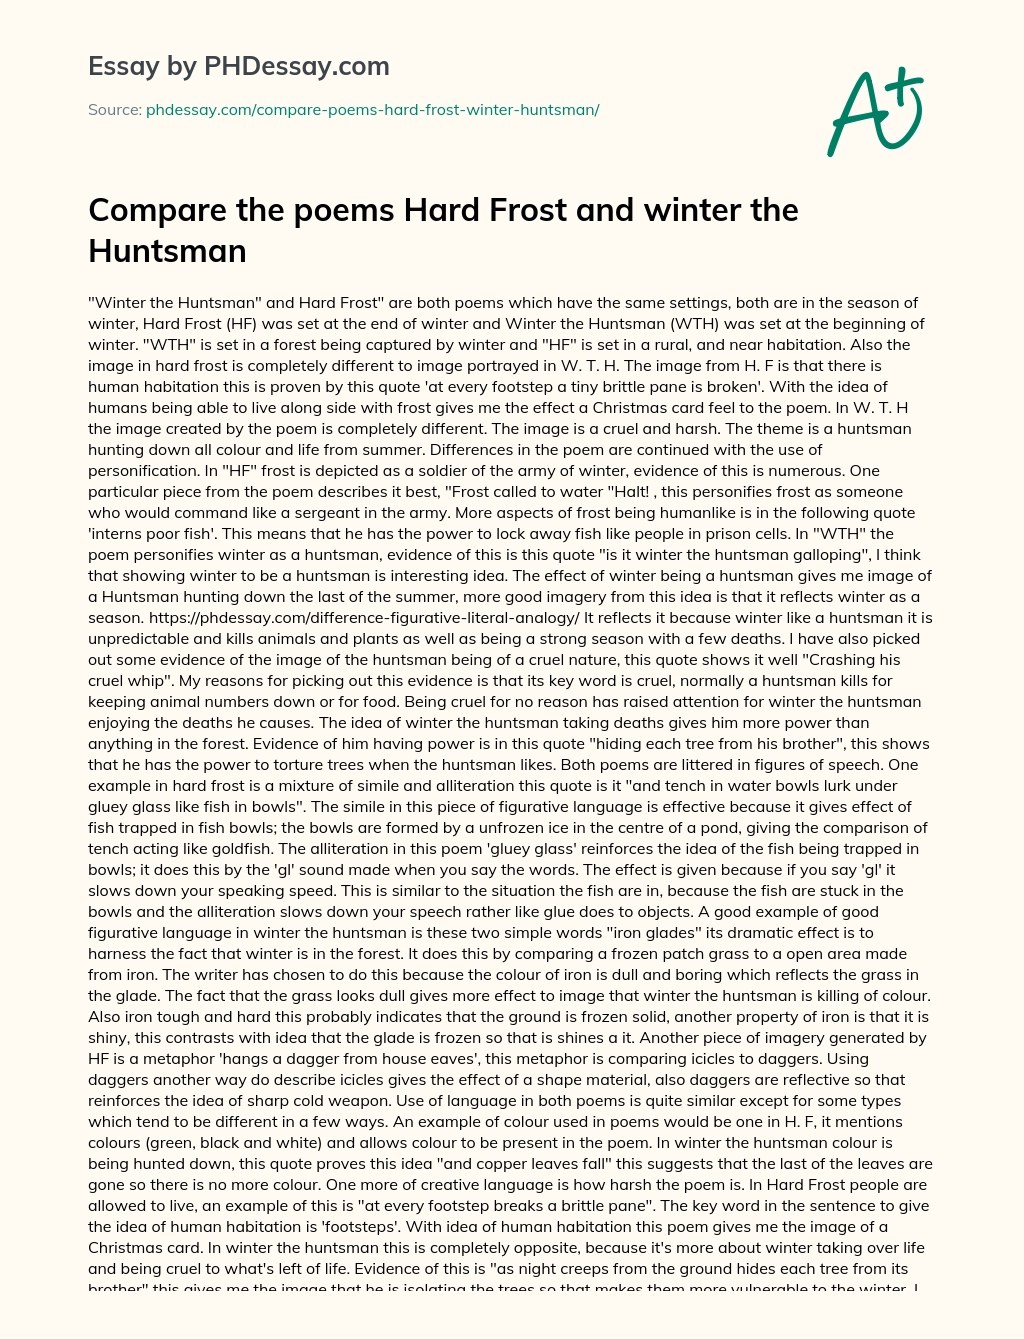 Compare the poems Hard Frost and winter the Huntsman essay